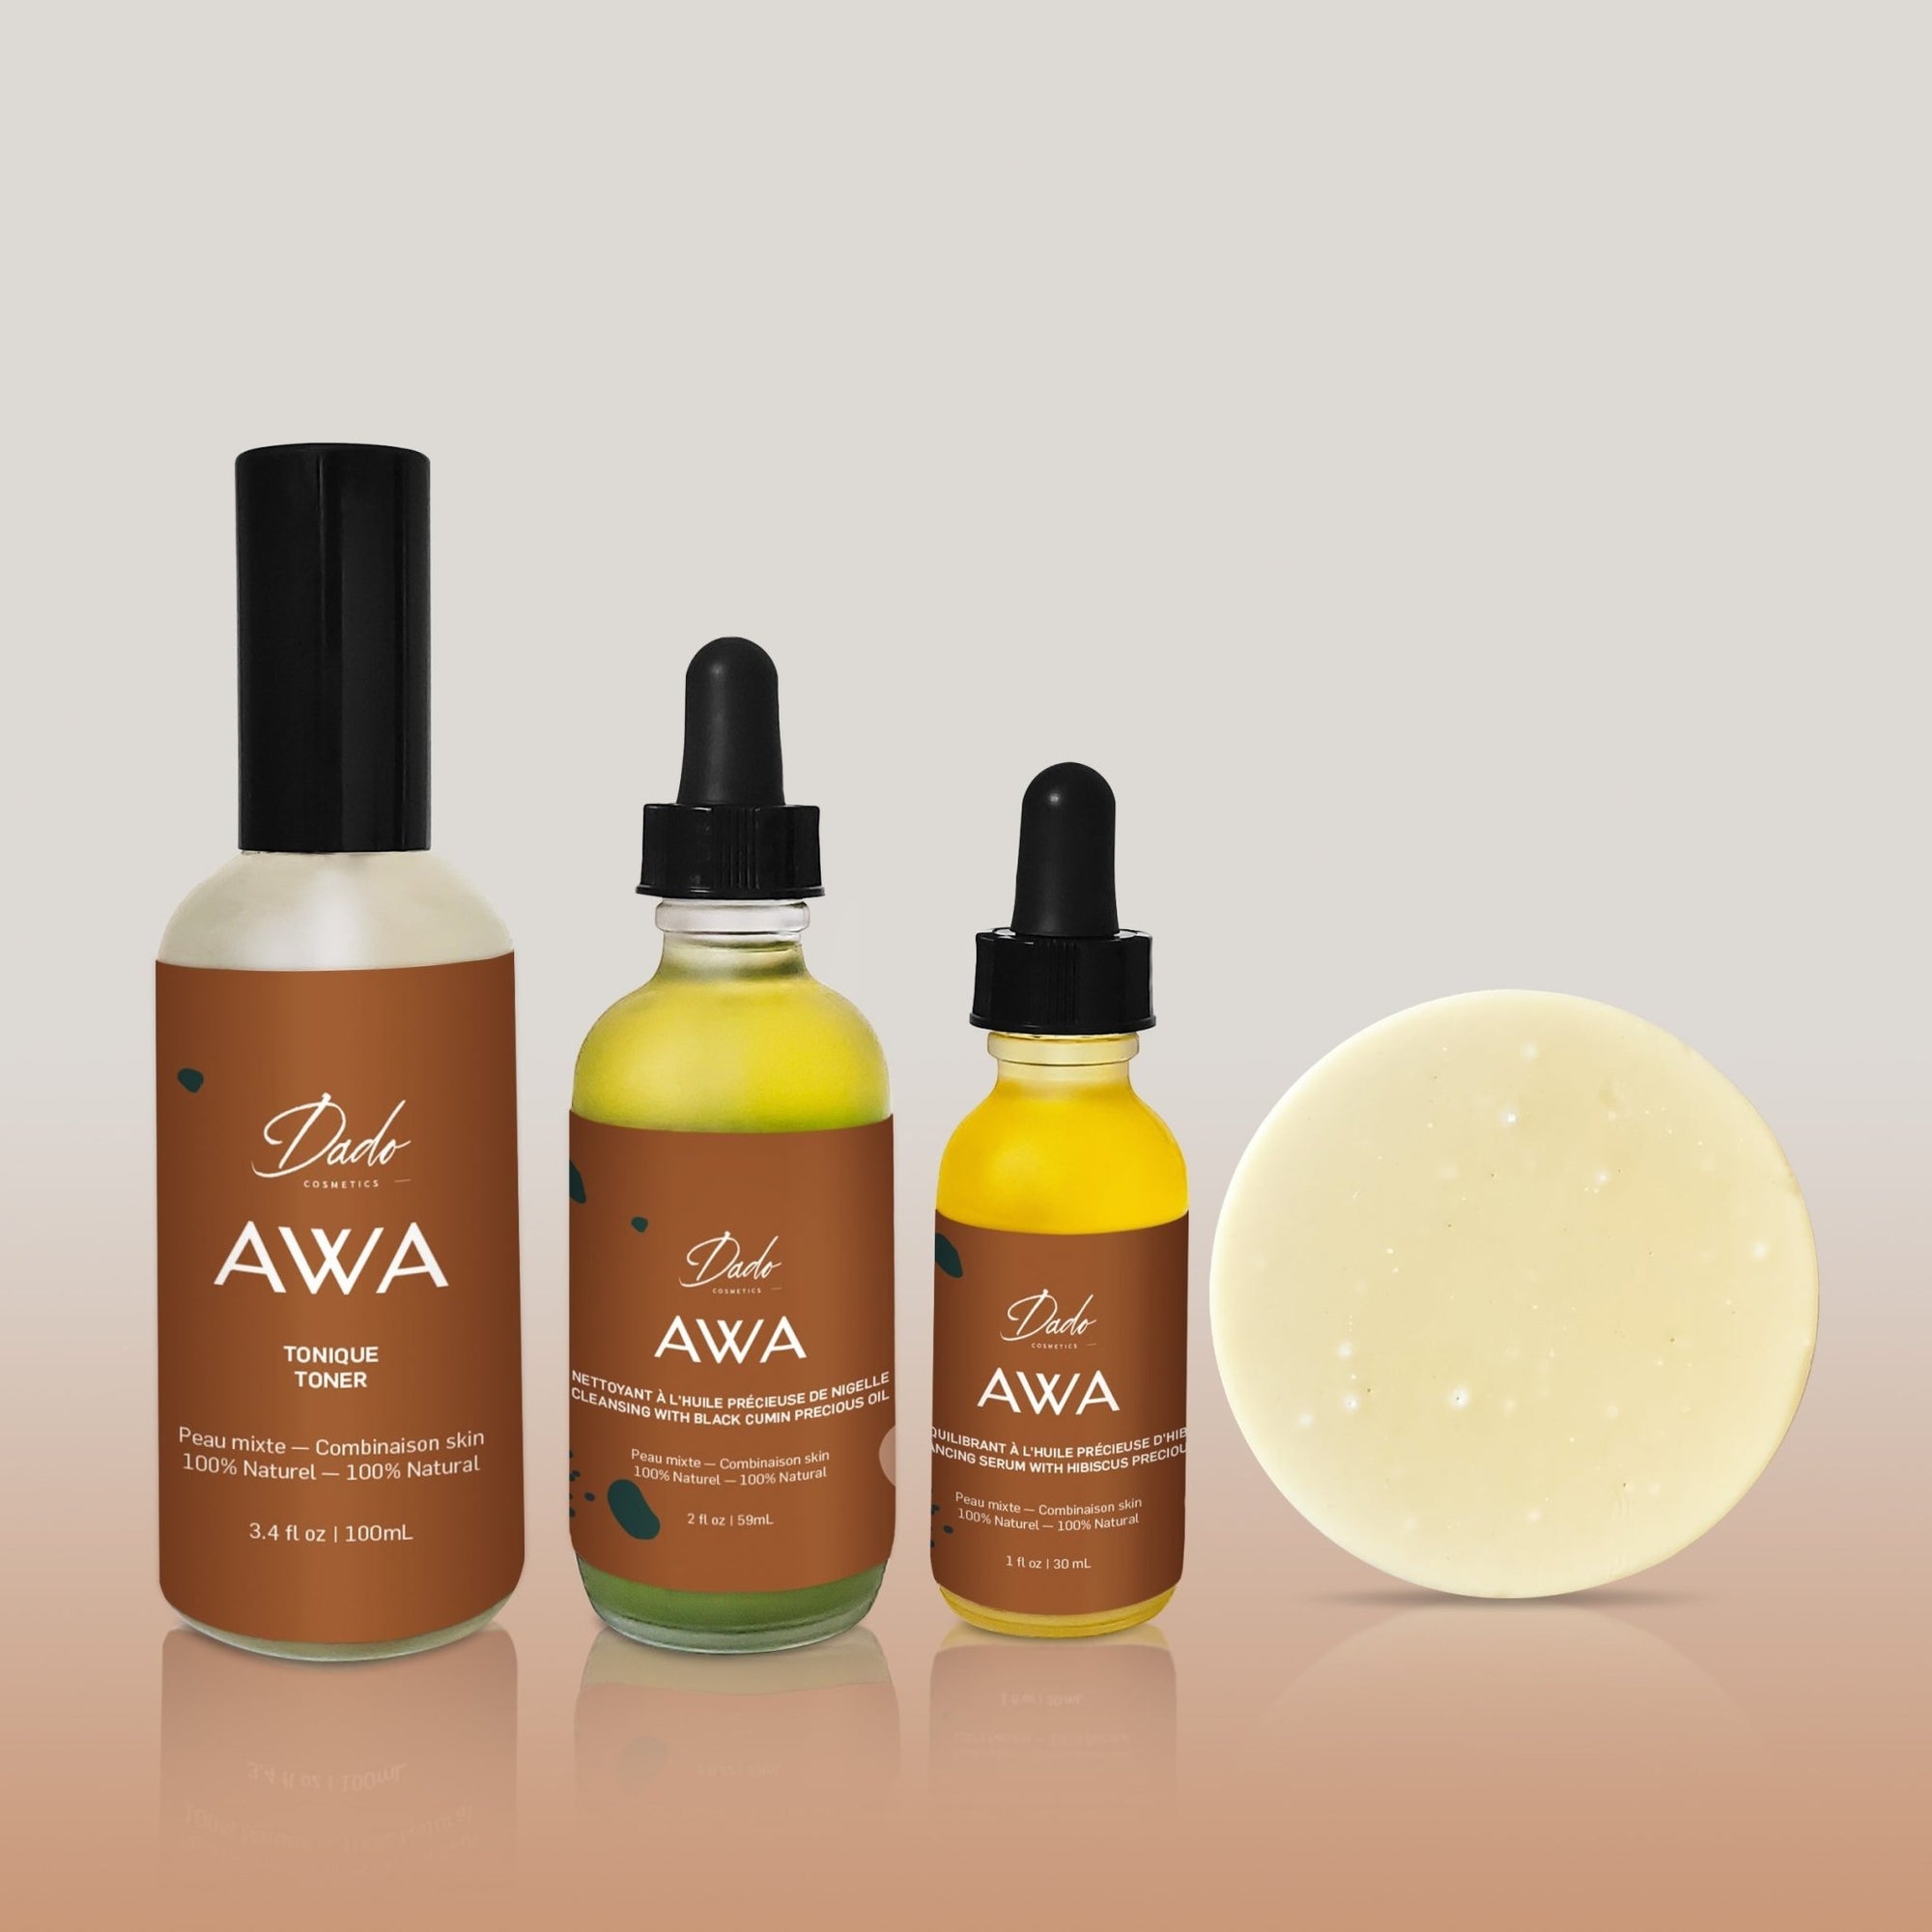 Natural care with precious oils from Africa